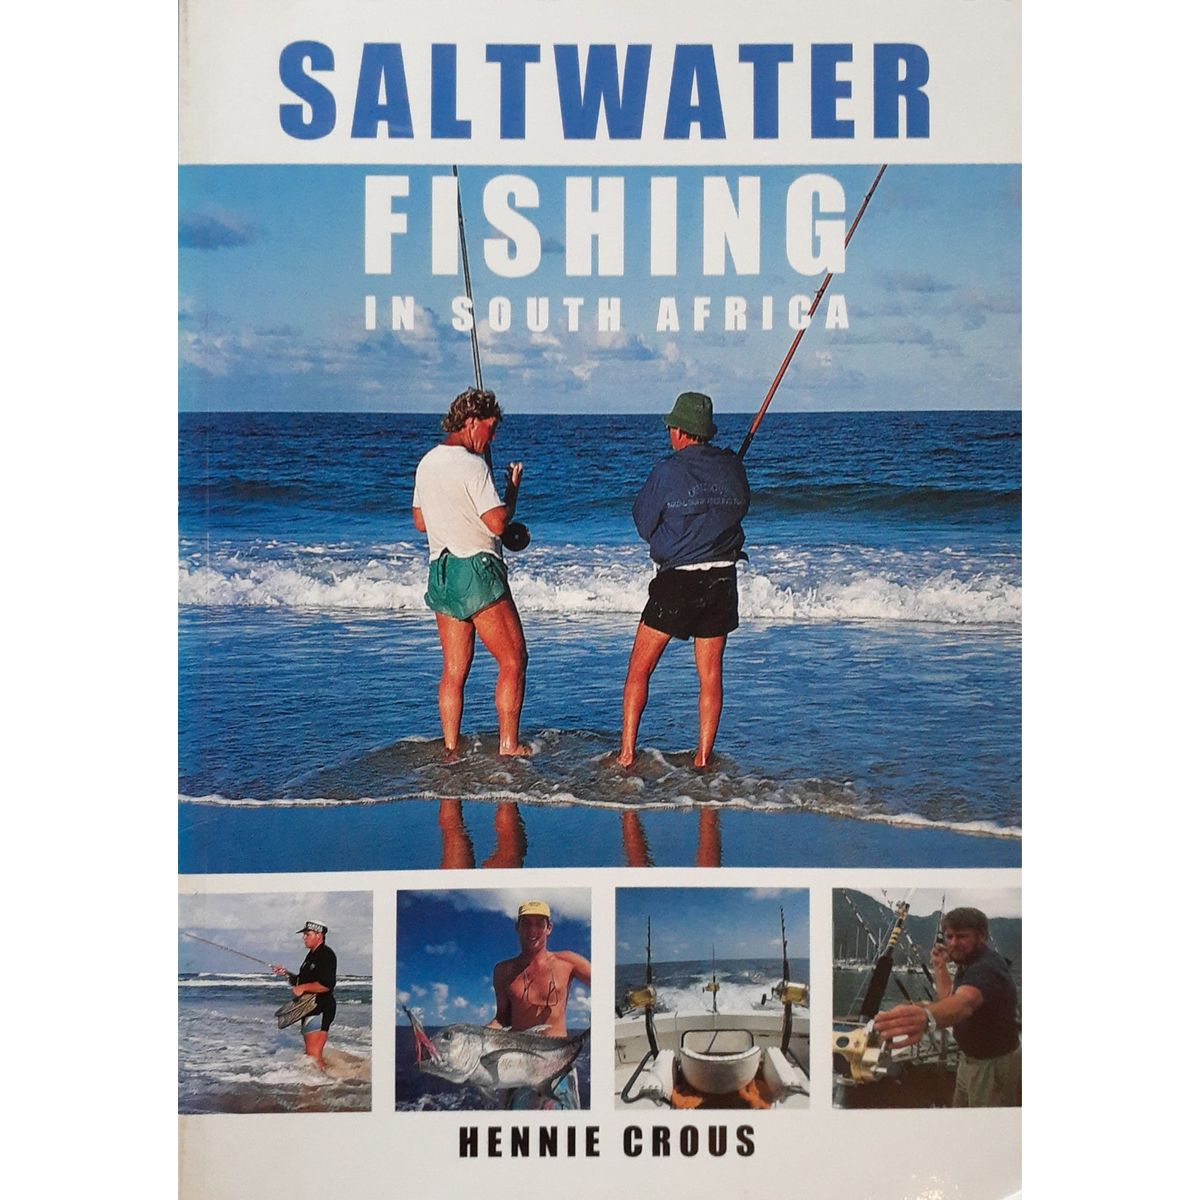 ISBN: 9781868723072 / 1868723070 - Saltwater Fishing in South Africa by Hennie Crous [2000]